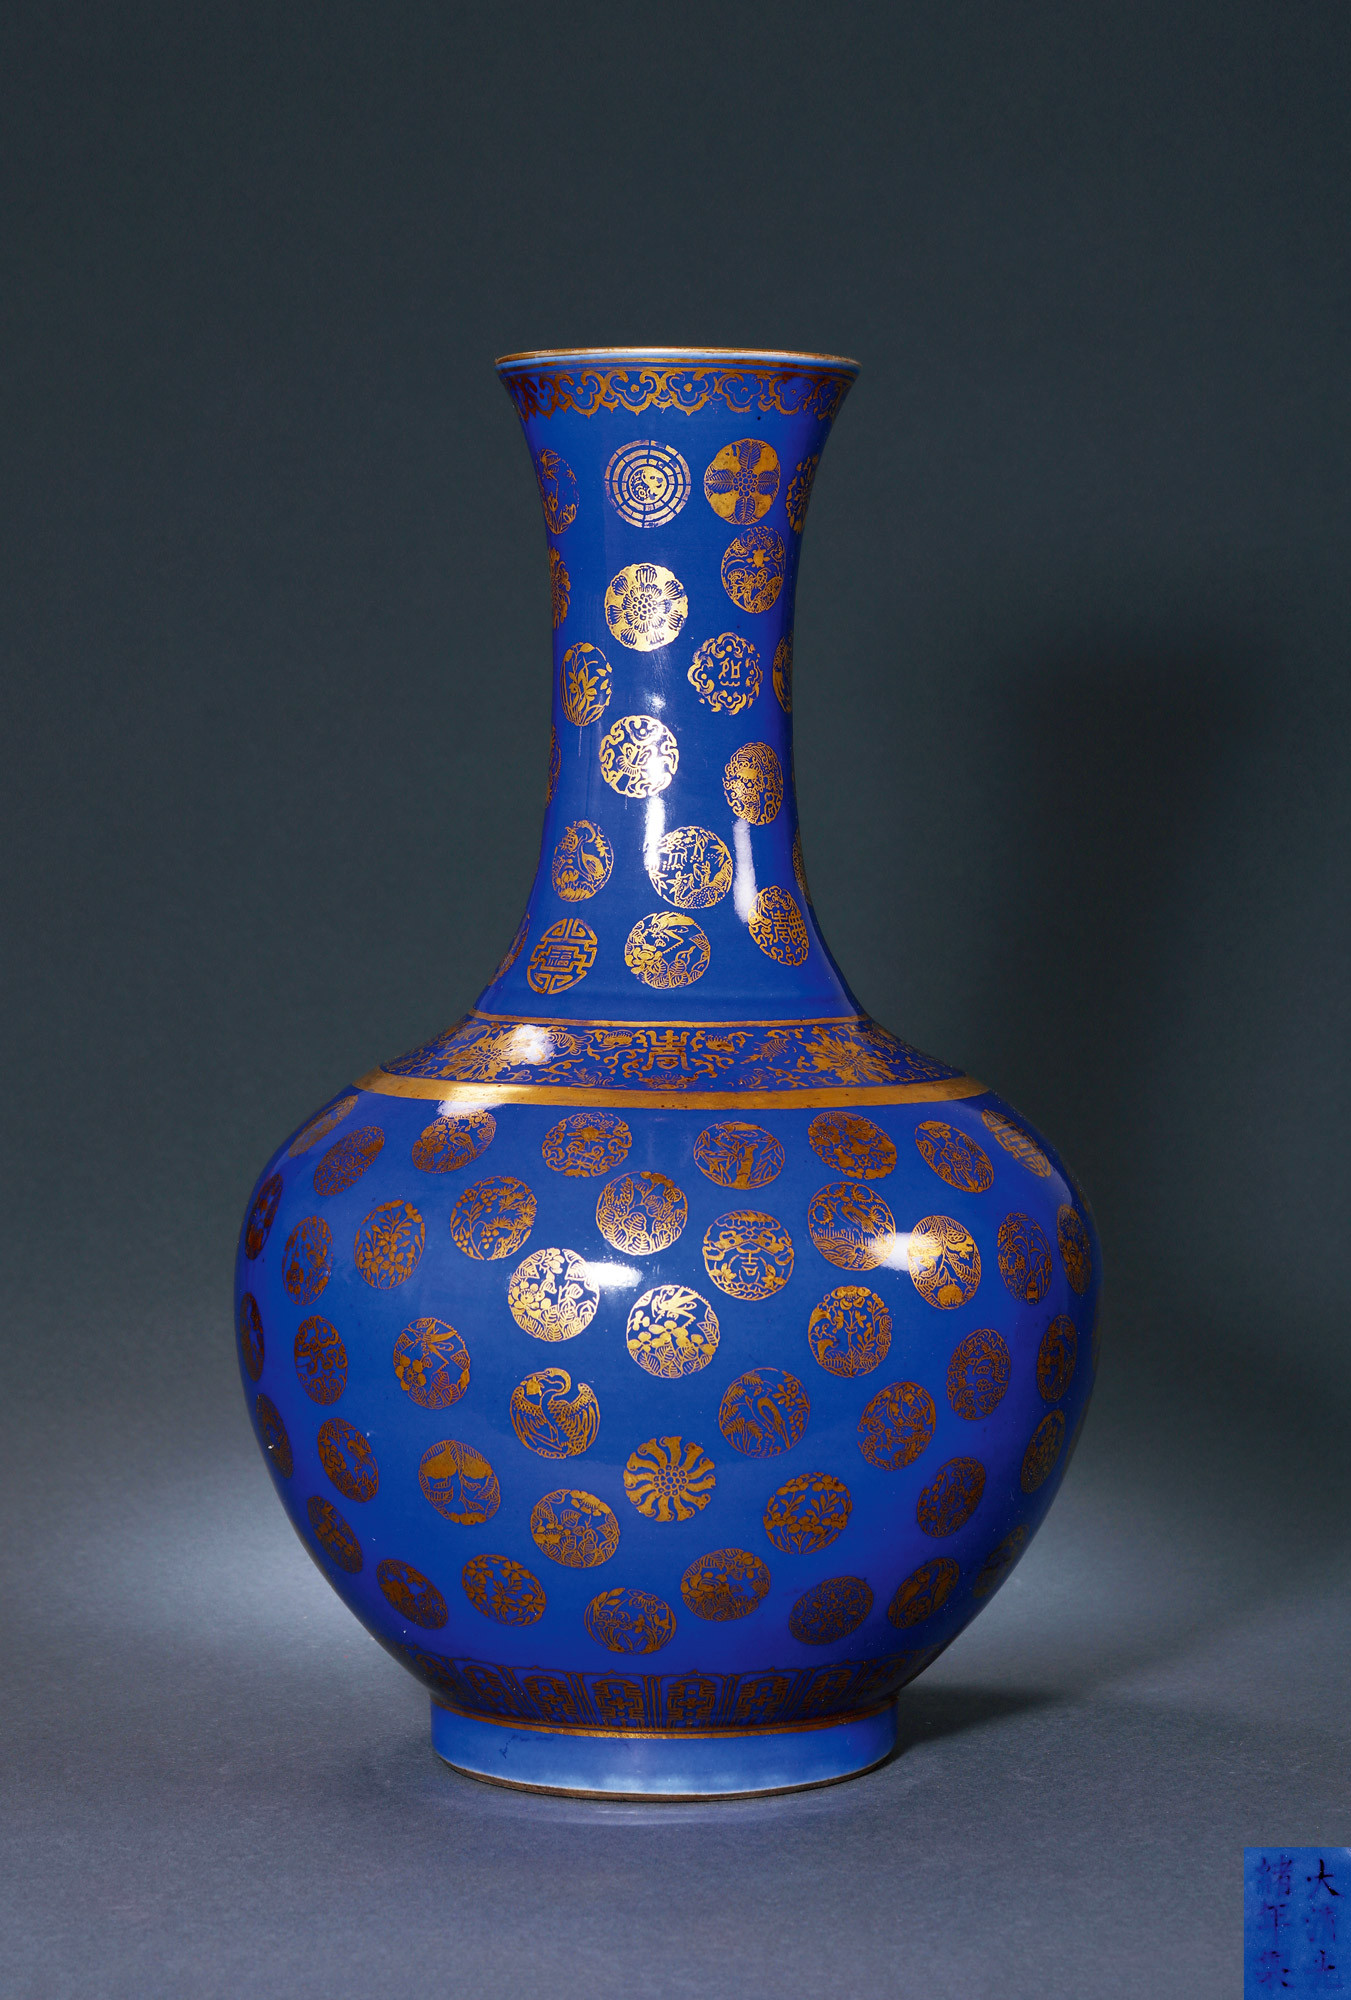 A BLUE GLAZE AND GILTED VASE